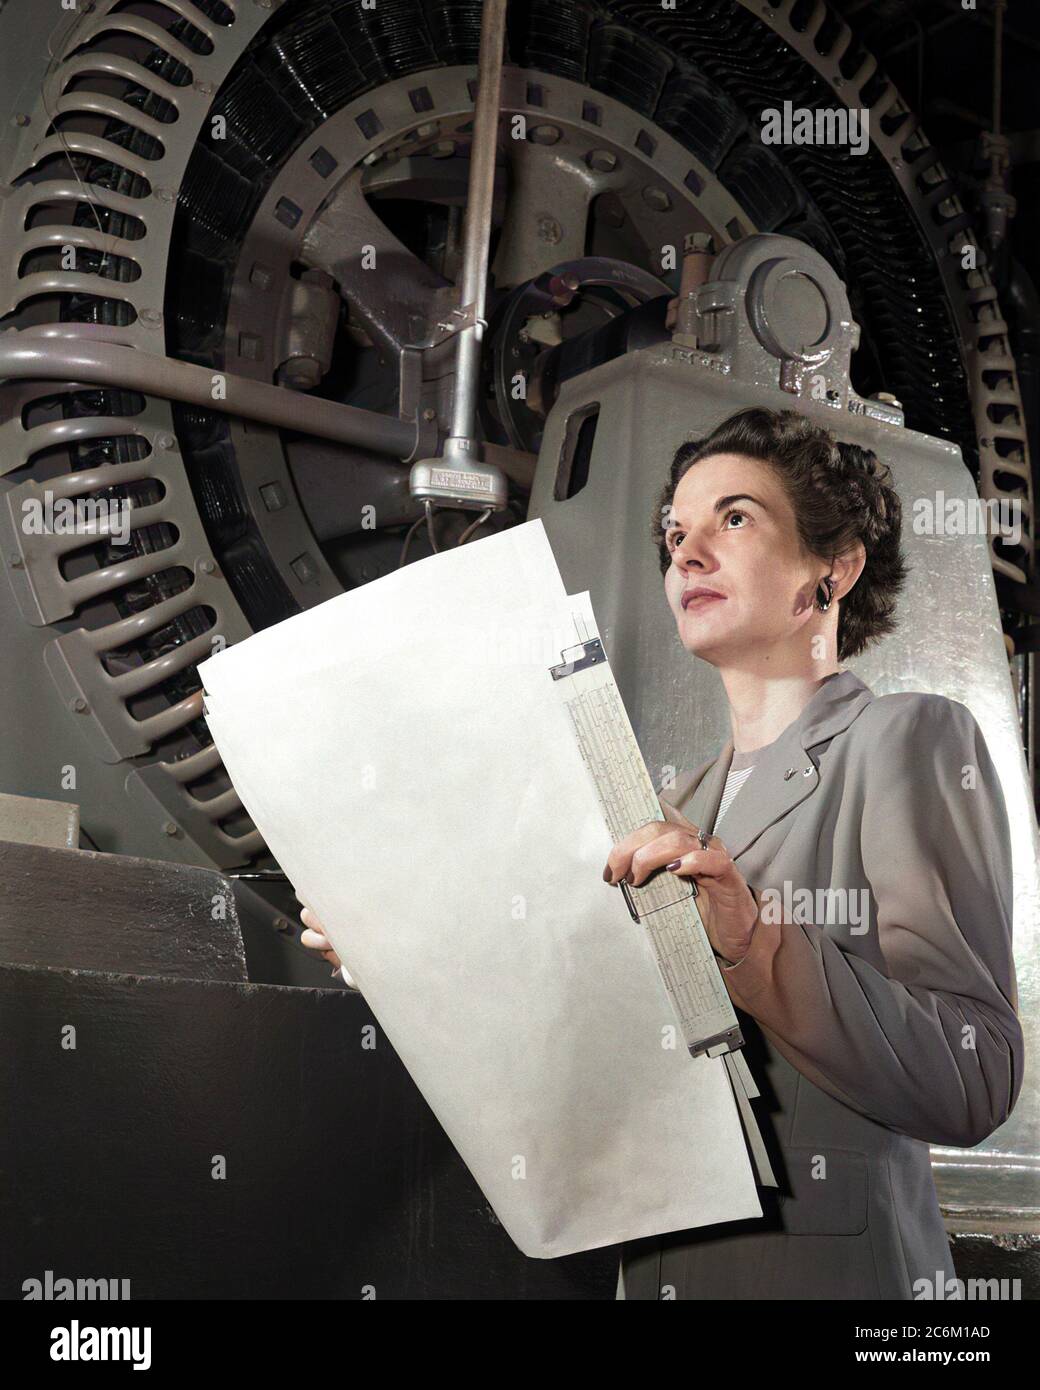 1952 , USA : The american Electrical Engineer woman KITTY Wingfield O'BRIEN JOYNER ( 1916 - 1993 ) of NASA ,  at work , expert in Electronics , at LANGLEY RESEARCH CENTER .  In this photo analyzing the operation of a wind tunnel turbine at NACA Langley in 1952 . Remembered like the first woman engineer at the Memorial Langley Aeronautical Laboratory . DIGITALLY COLORIZED .- NASA - N.A.S.A. - The National Aeronautics and Space Administration - foto storiche - foto storica  - scienziato - scientist  - INGEGNERE  DONNA  - INGEGNERIA ELETTRONICA - DONNE DONNA - AL LAVORO - AERONAUTICA --- Archivio Stock Photo